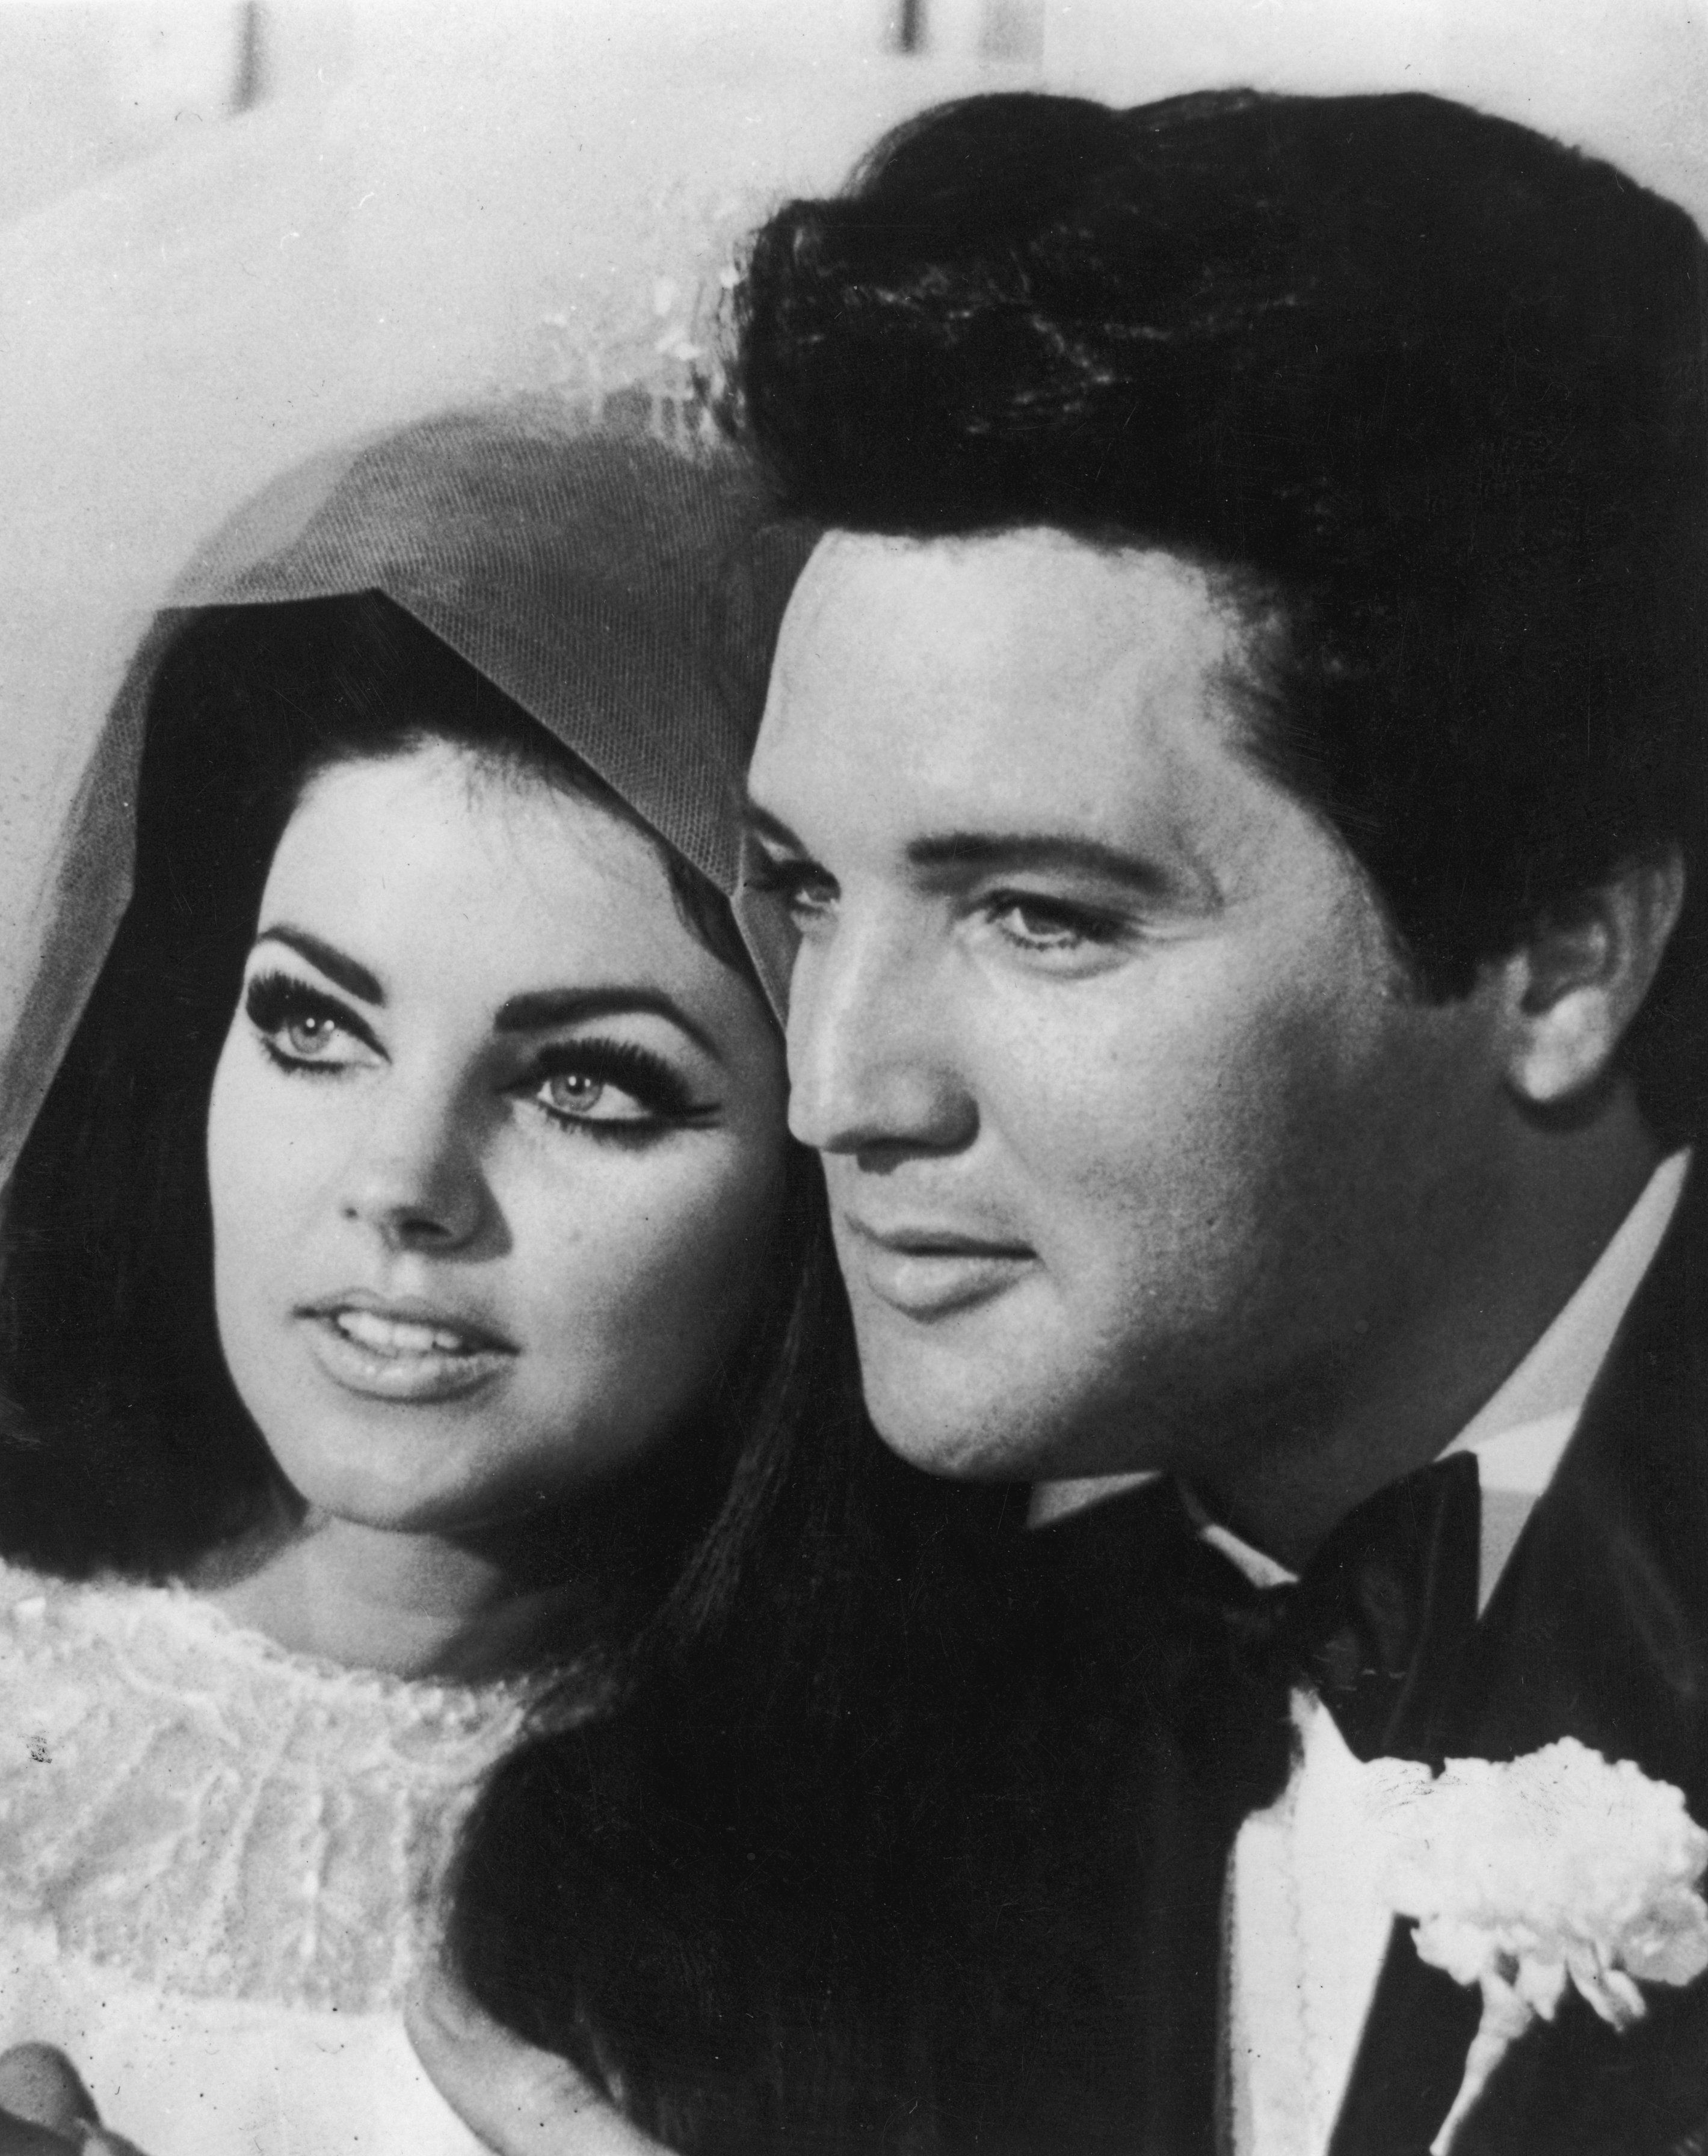 Elvis Presley with his bride Priscilla Beaulieu after their wedding in Las Vegas on May 1, 1967. | Source: Getty Images.